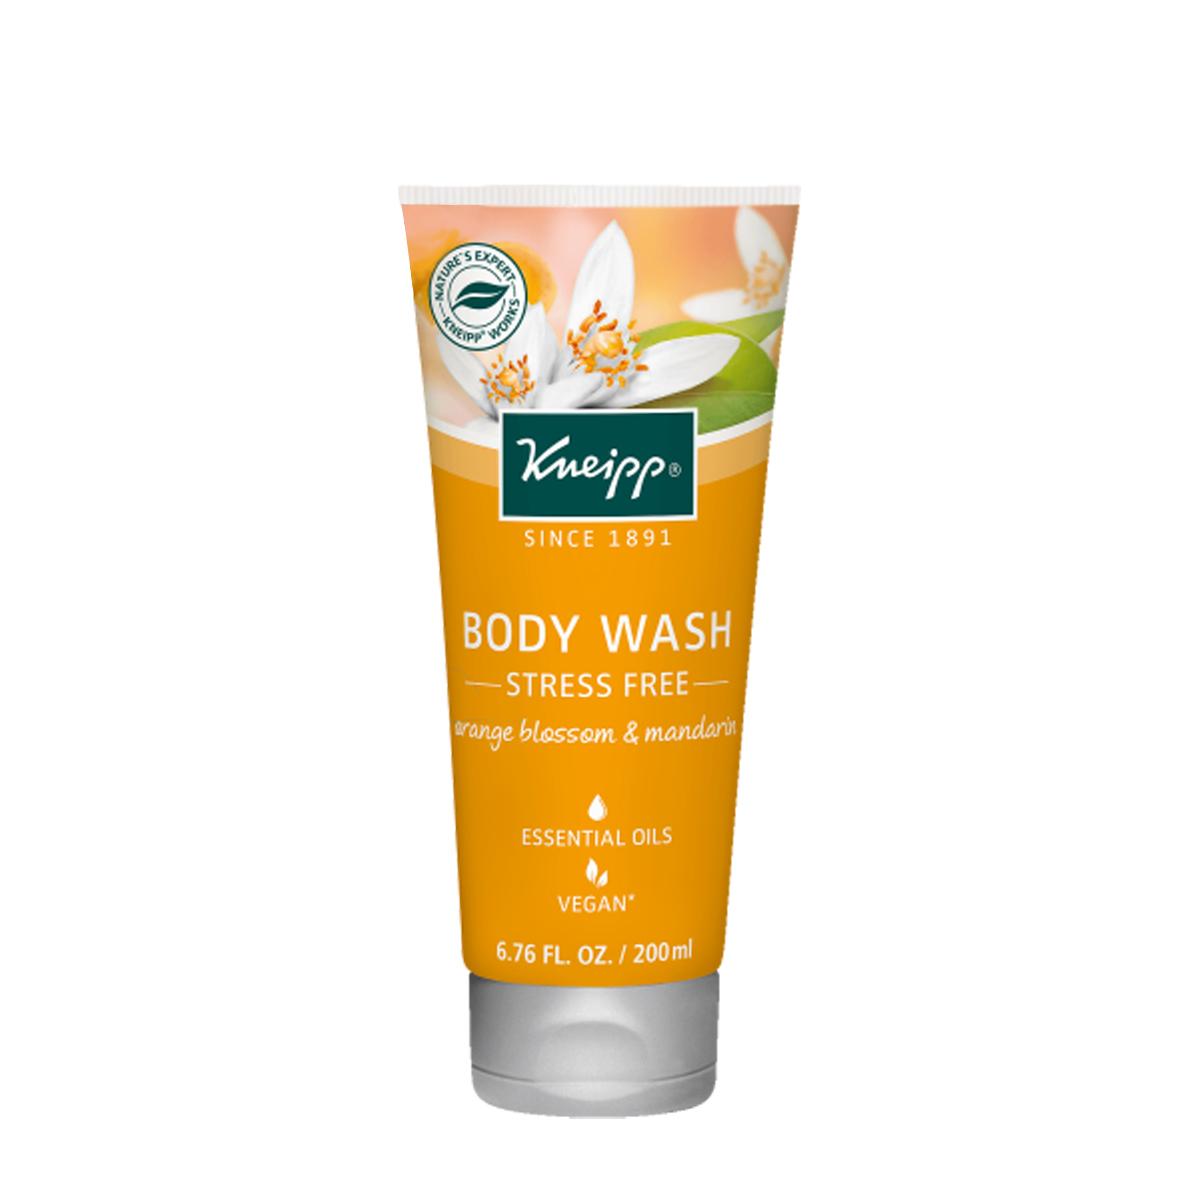 Primary image of Body Wash- Stress Free